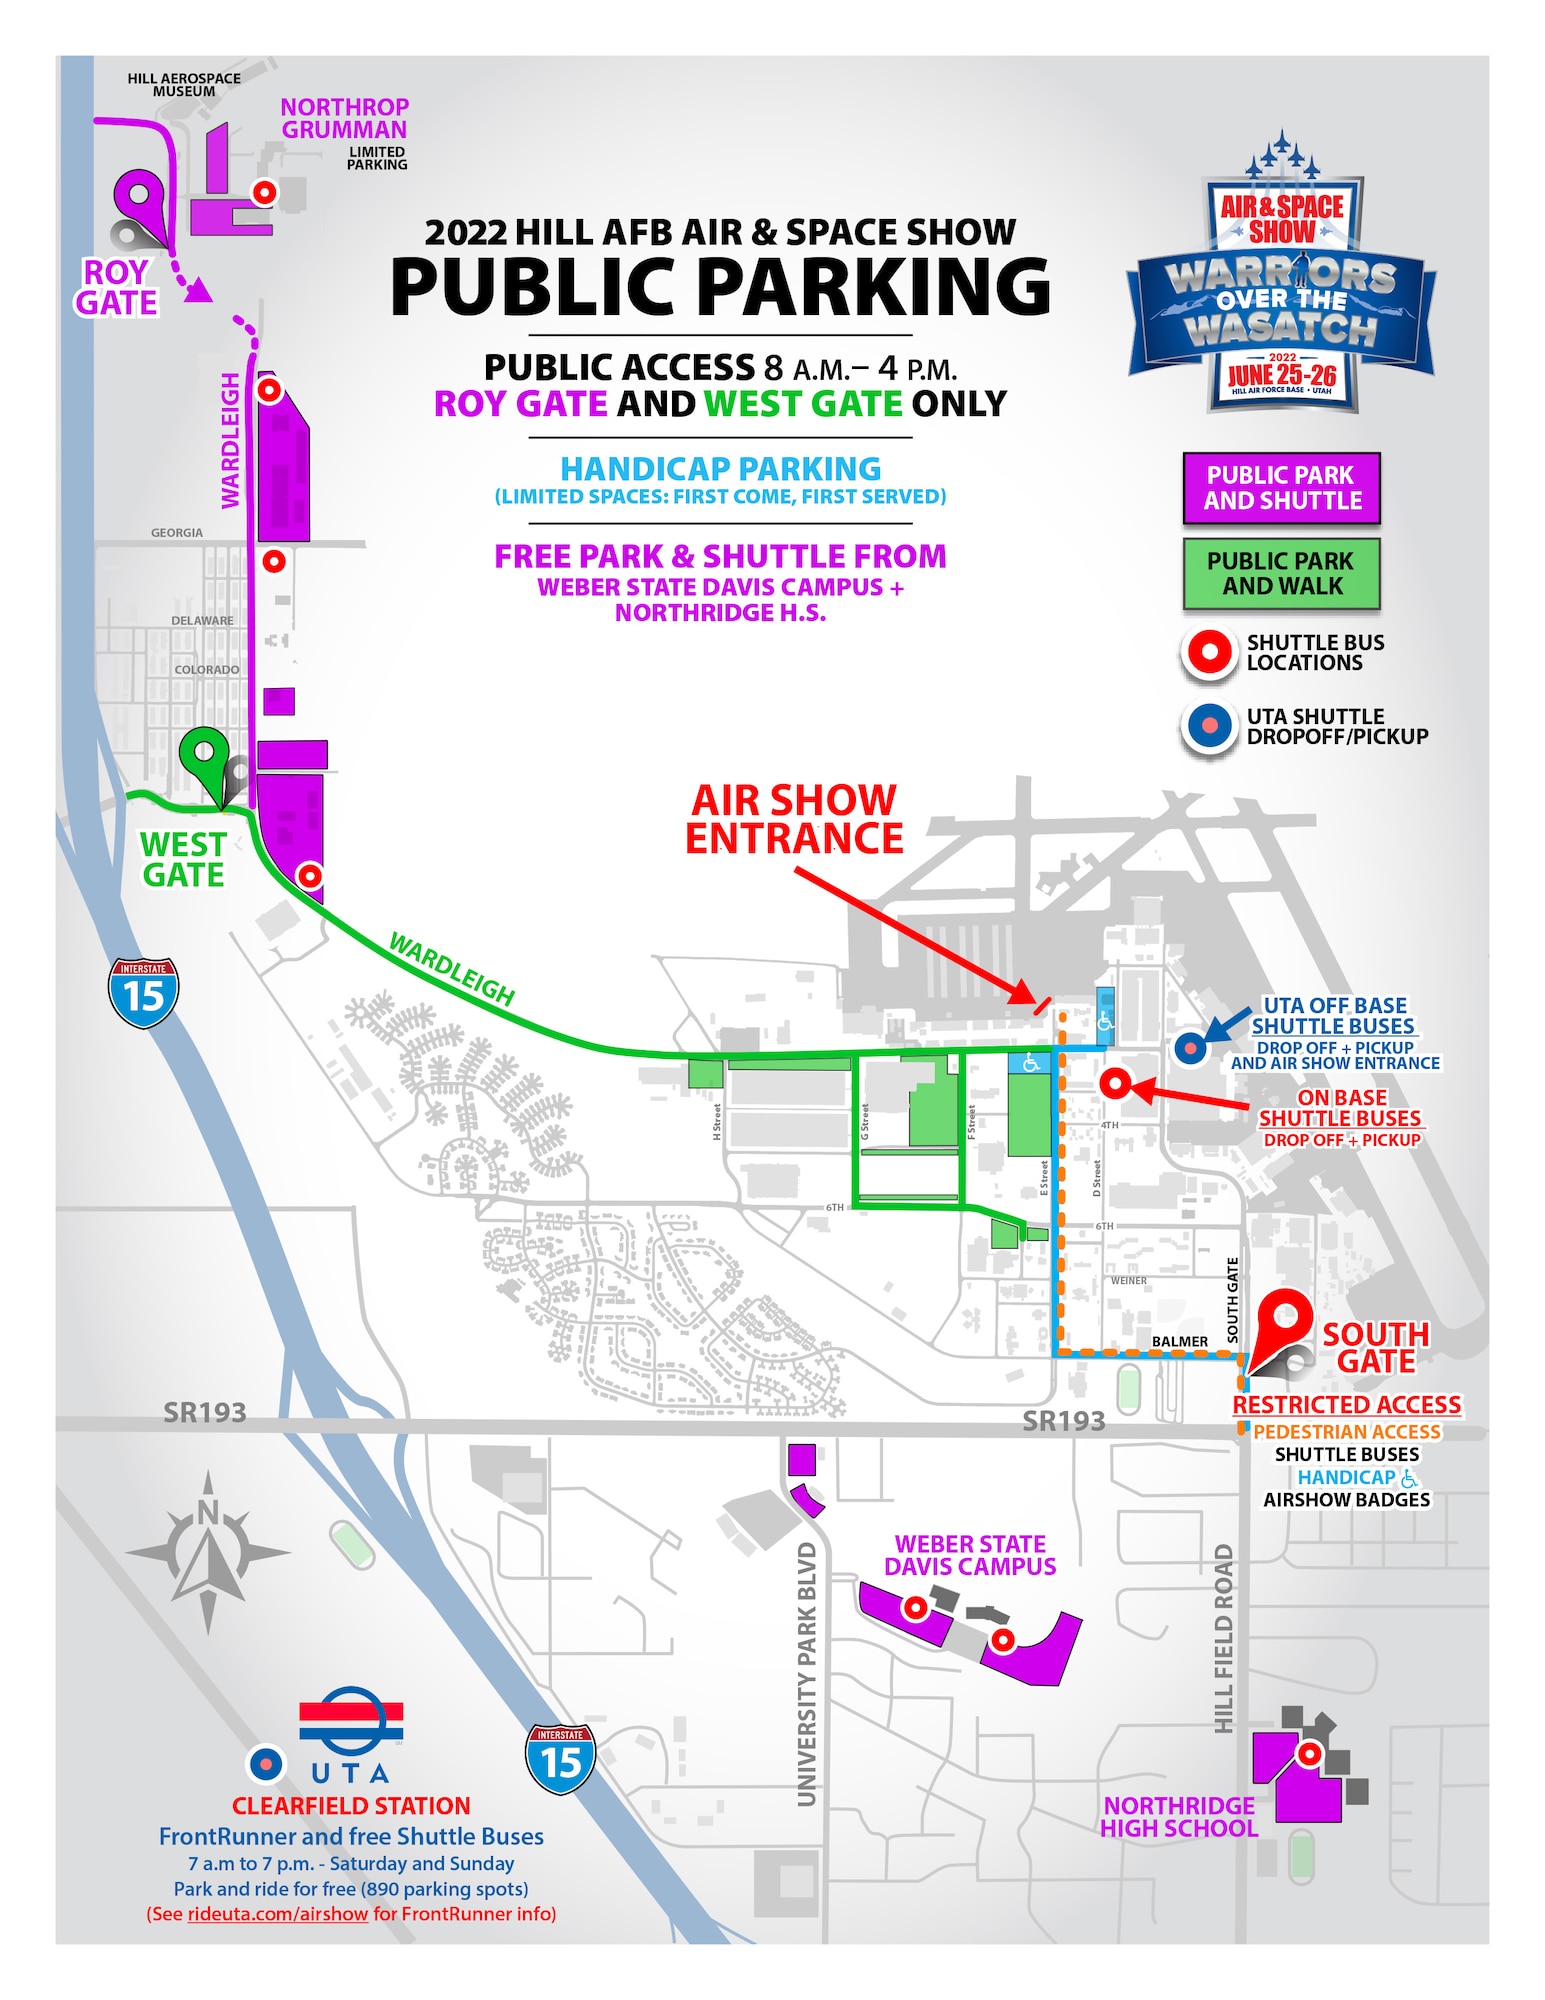 Map of parking options for the Hill Air and Space Show.